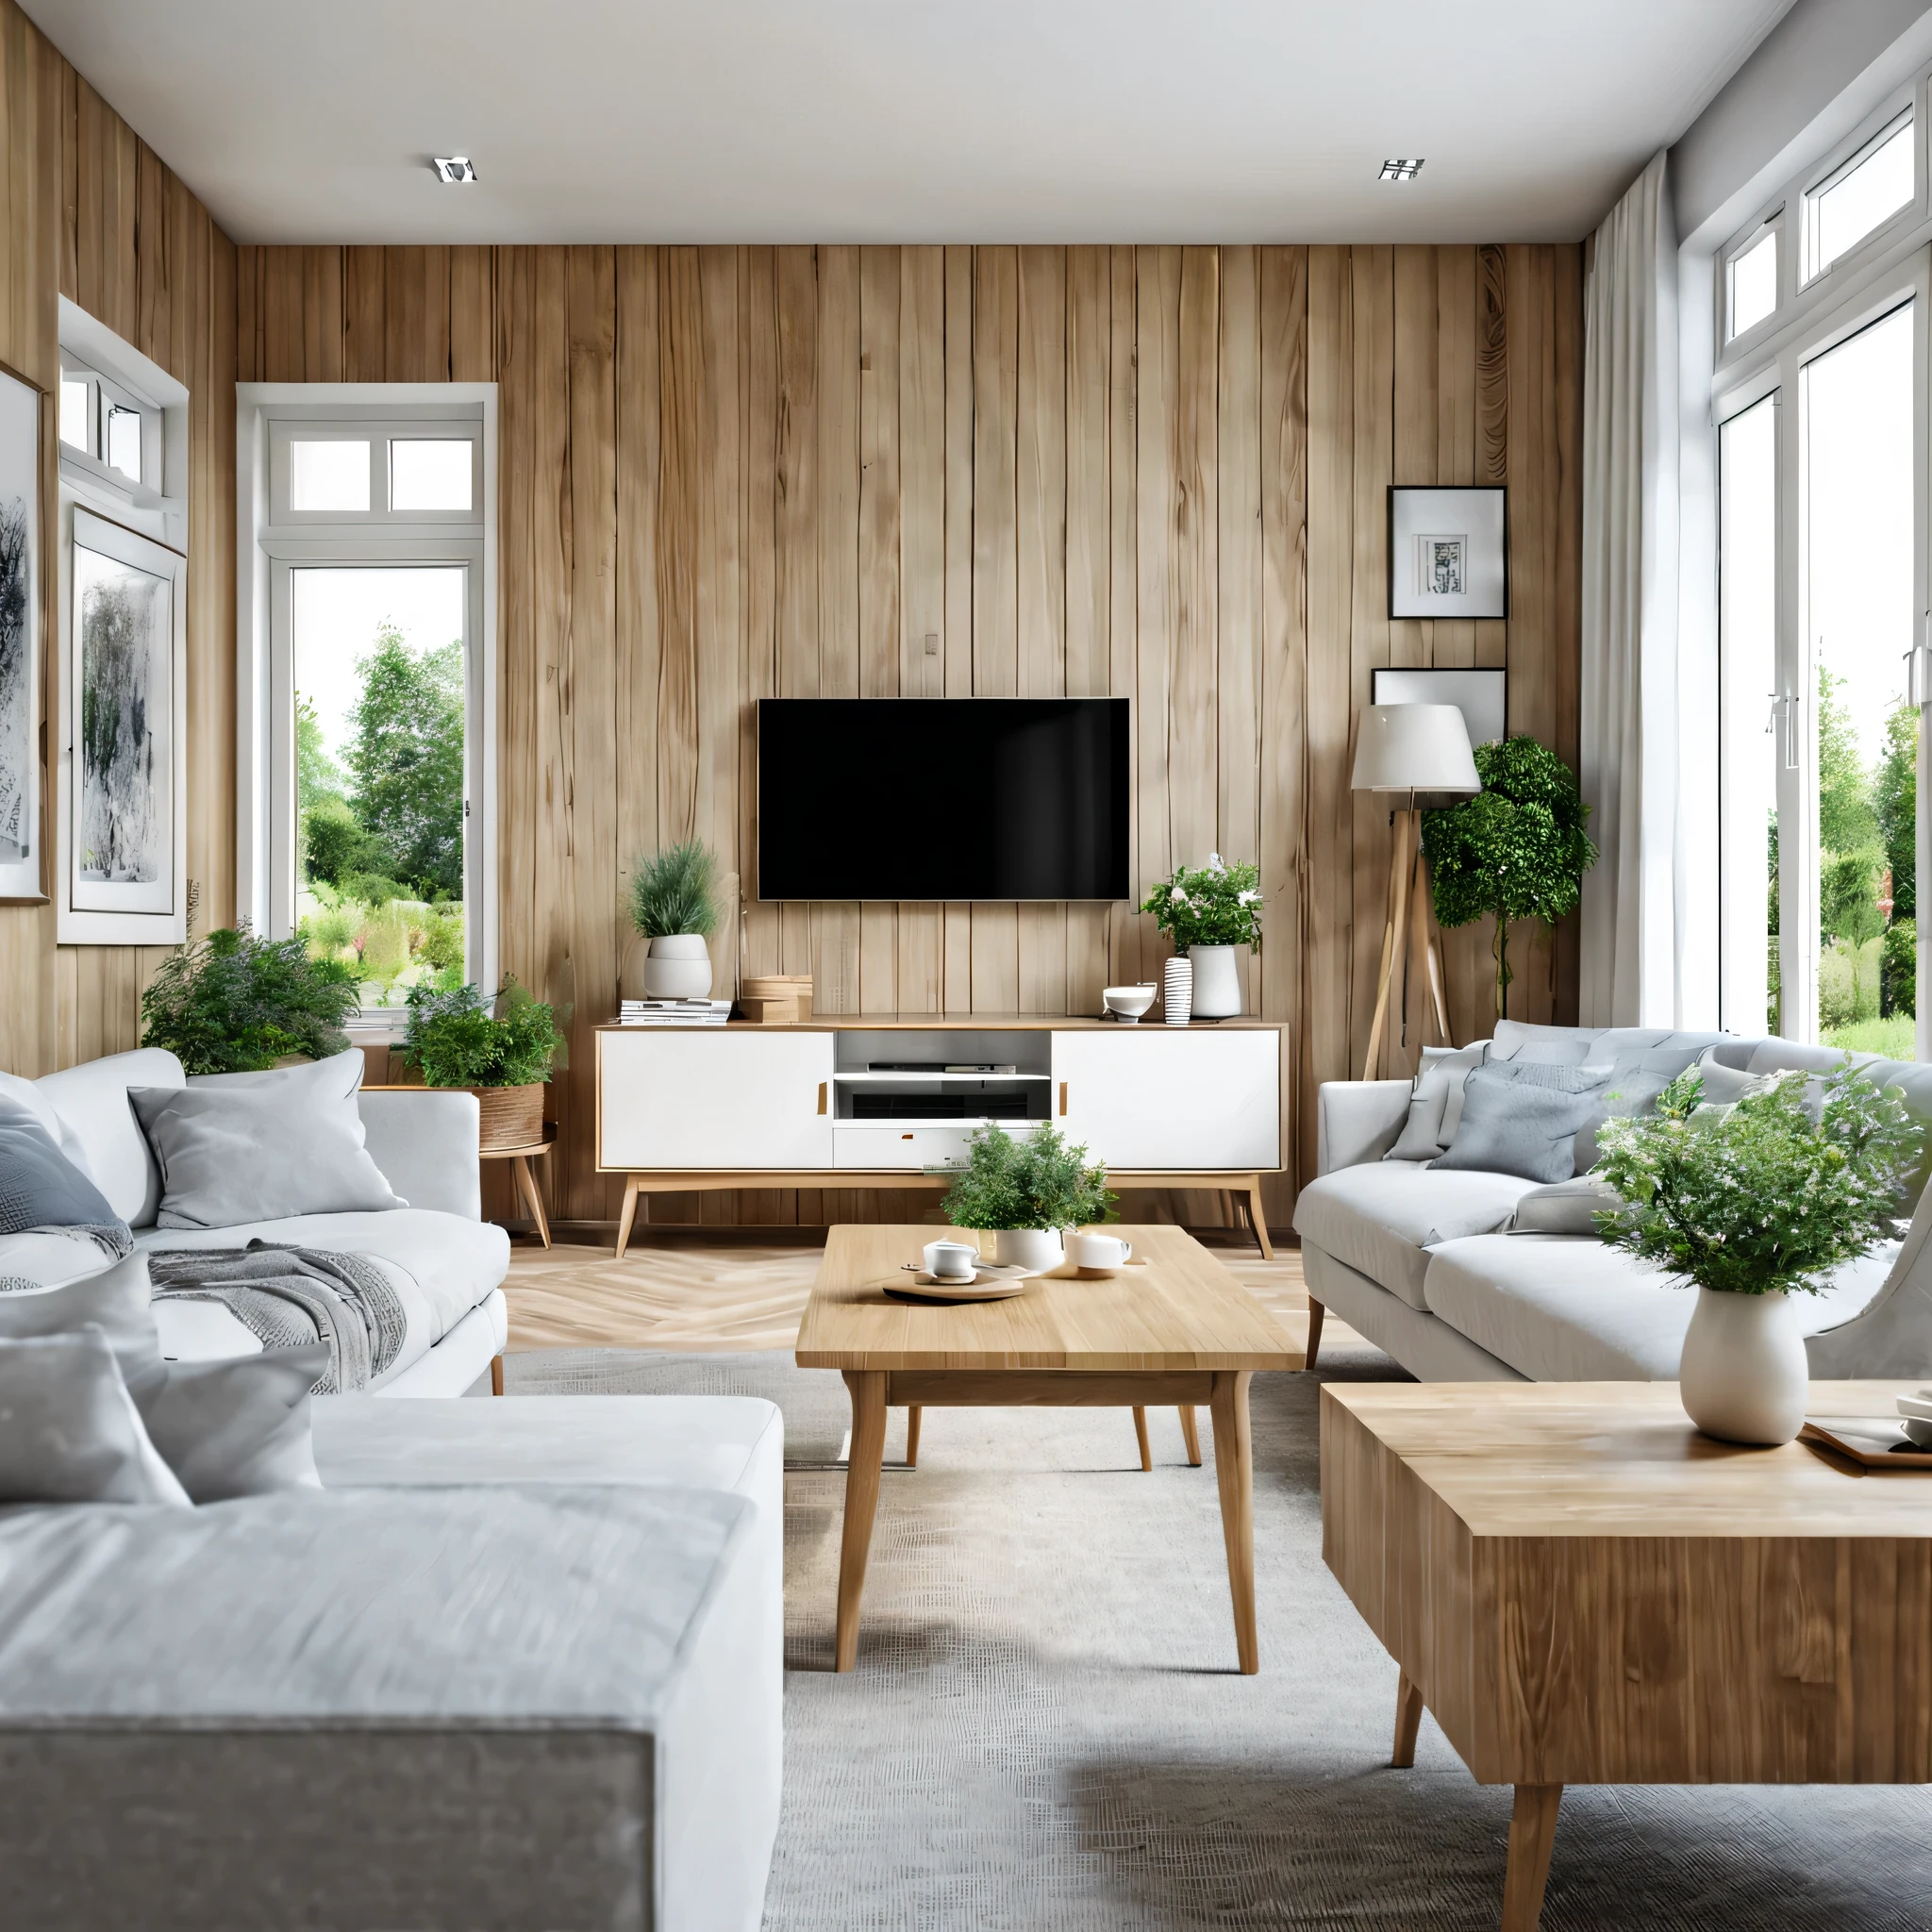  Living room design options, scandanavian style design, living room with window,
garden outside, family hall, television cabinet on the left coffee table at the center, sofa
on the right, whites and wood texture, --s 250 -